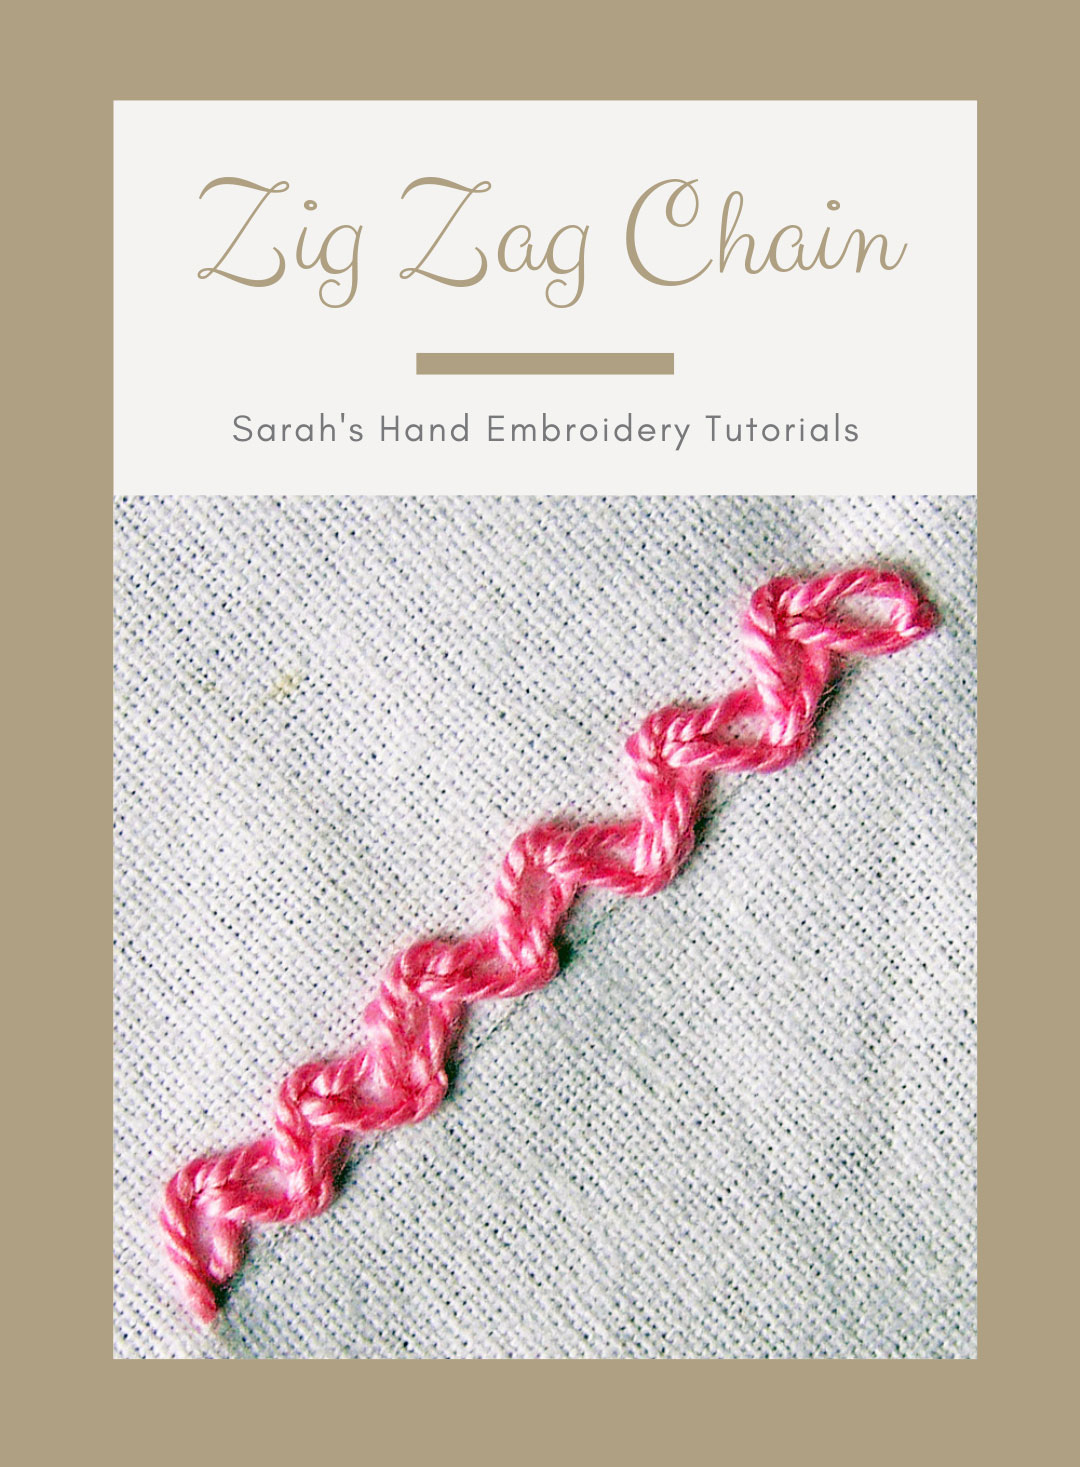 How to do Zigzag Chain Stitch - Sarah's Hand Embroidery Tutorials